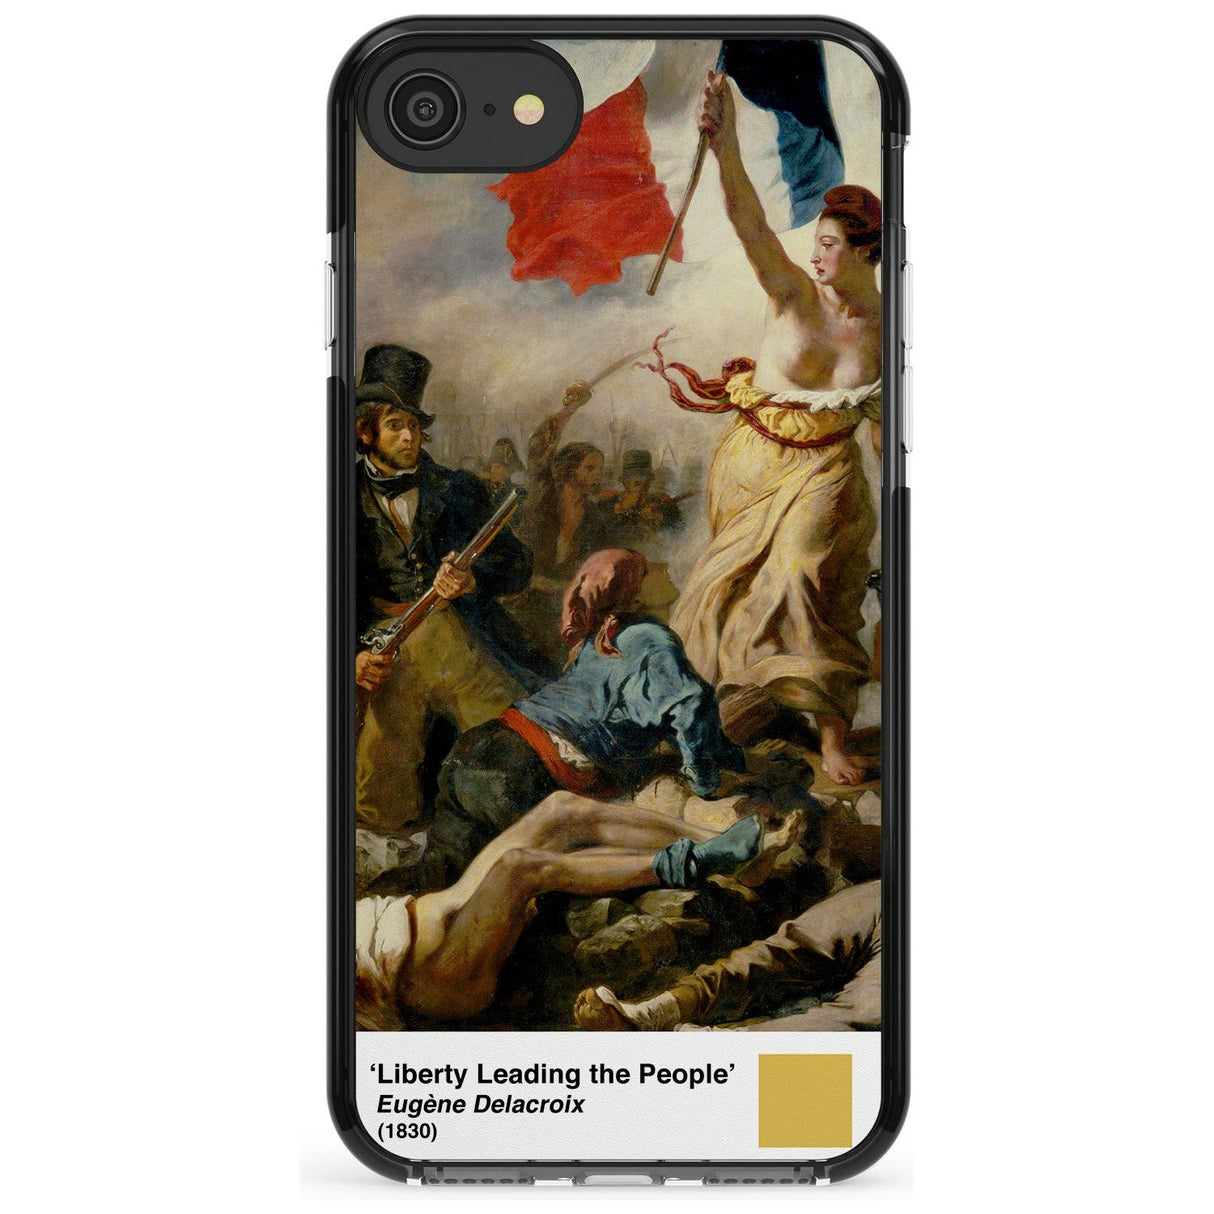 The Birth of Venus Phone Case for iPhone SE